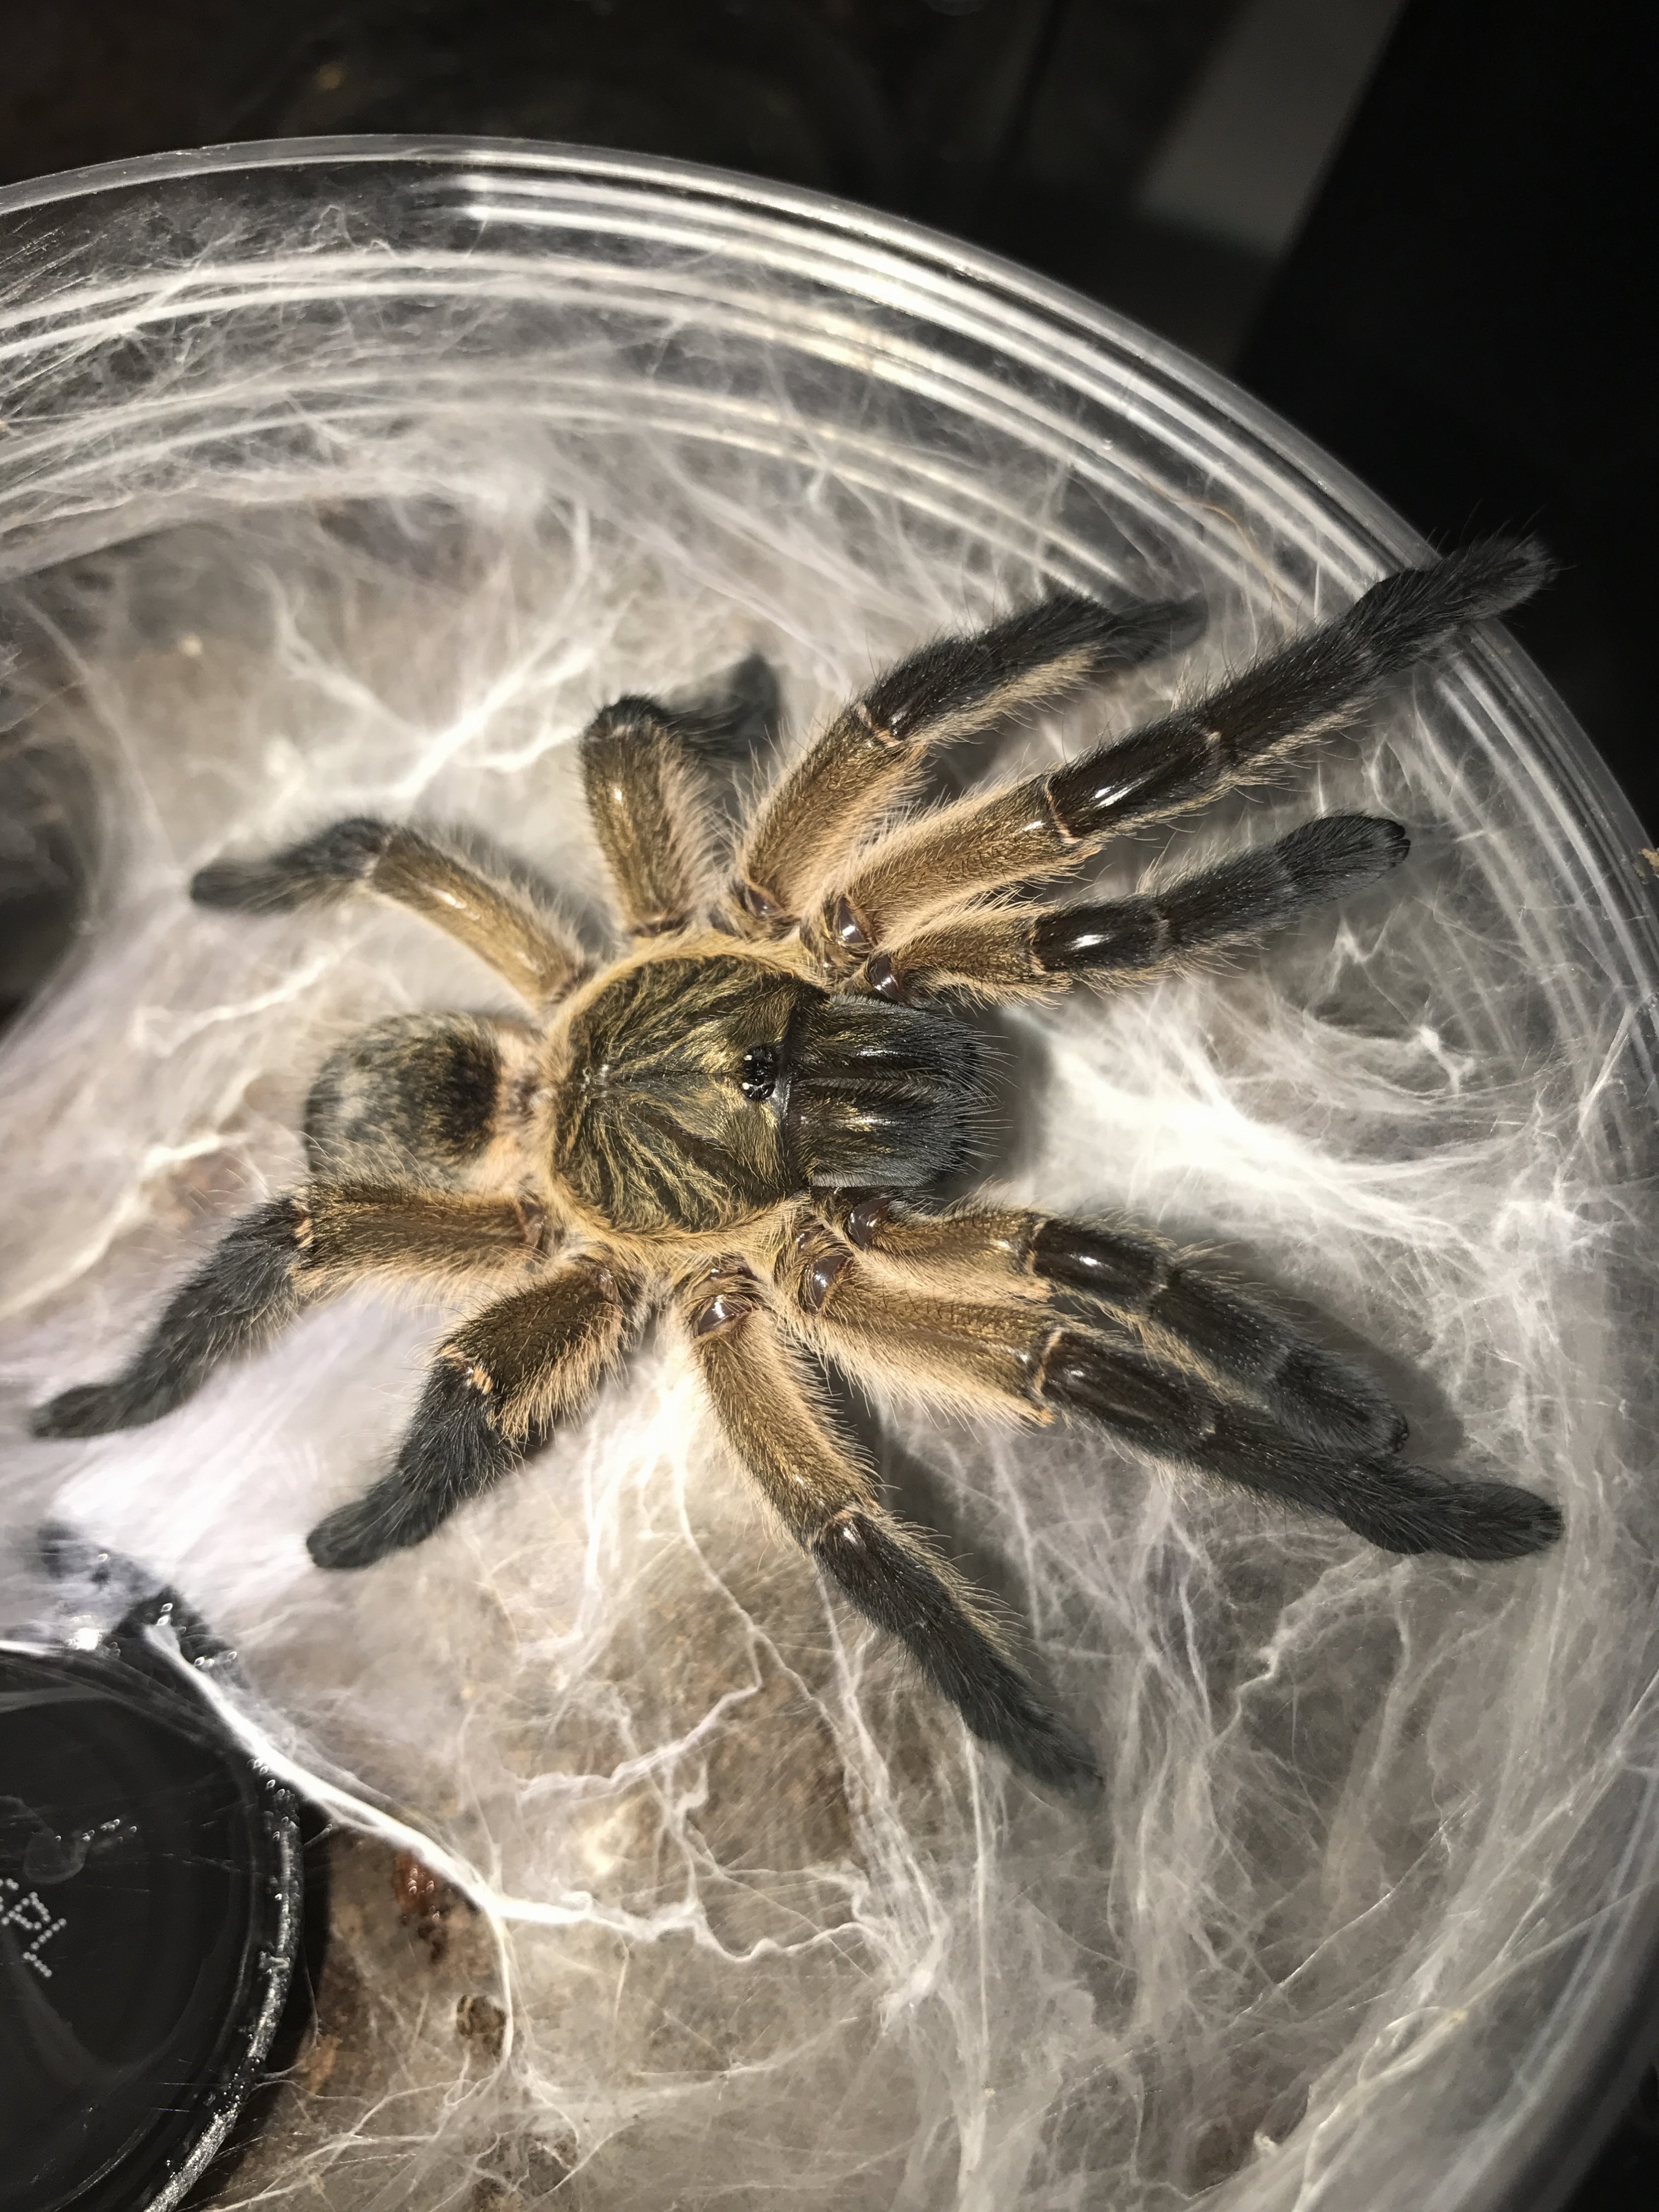 H. pulchripes freshly molted